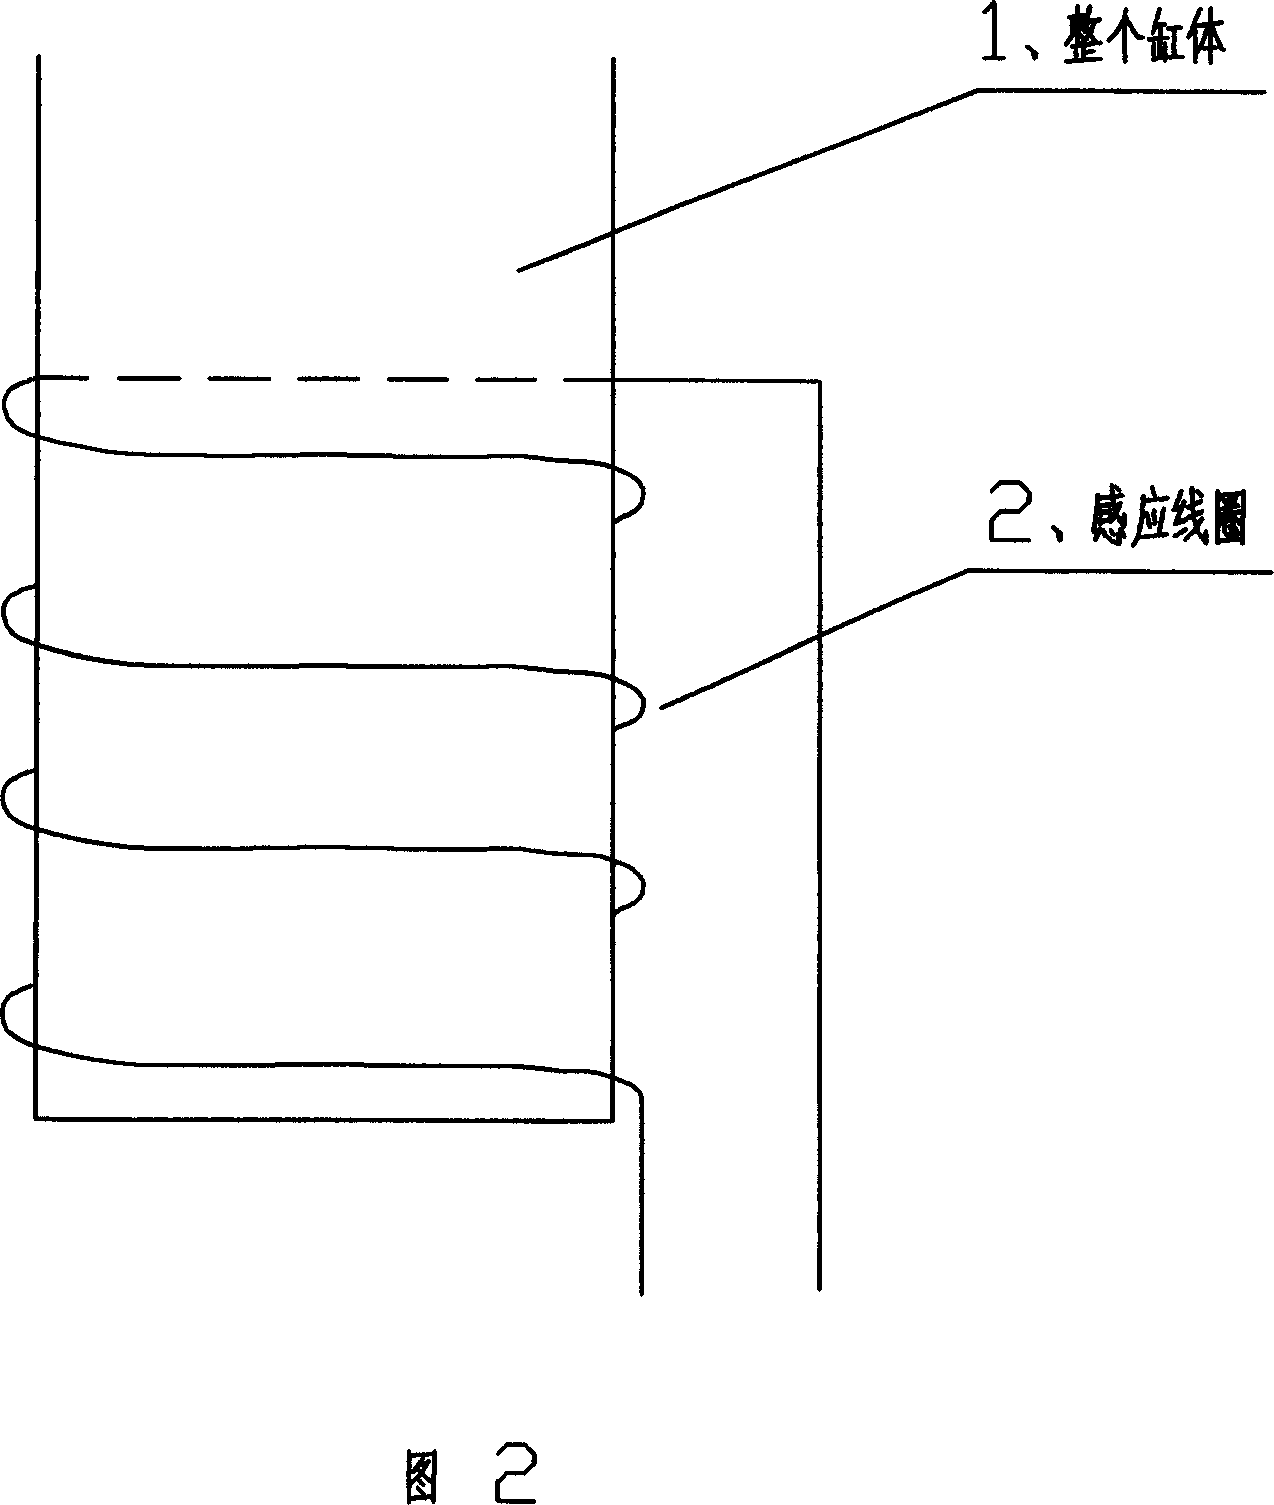 Piston reciprocating magnetic repulsion generating (electric) module and its combined application system